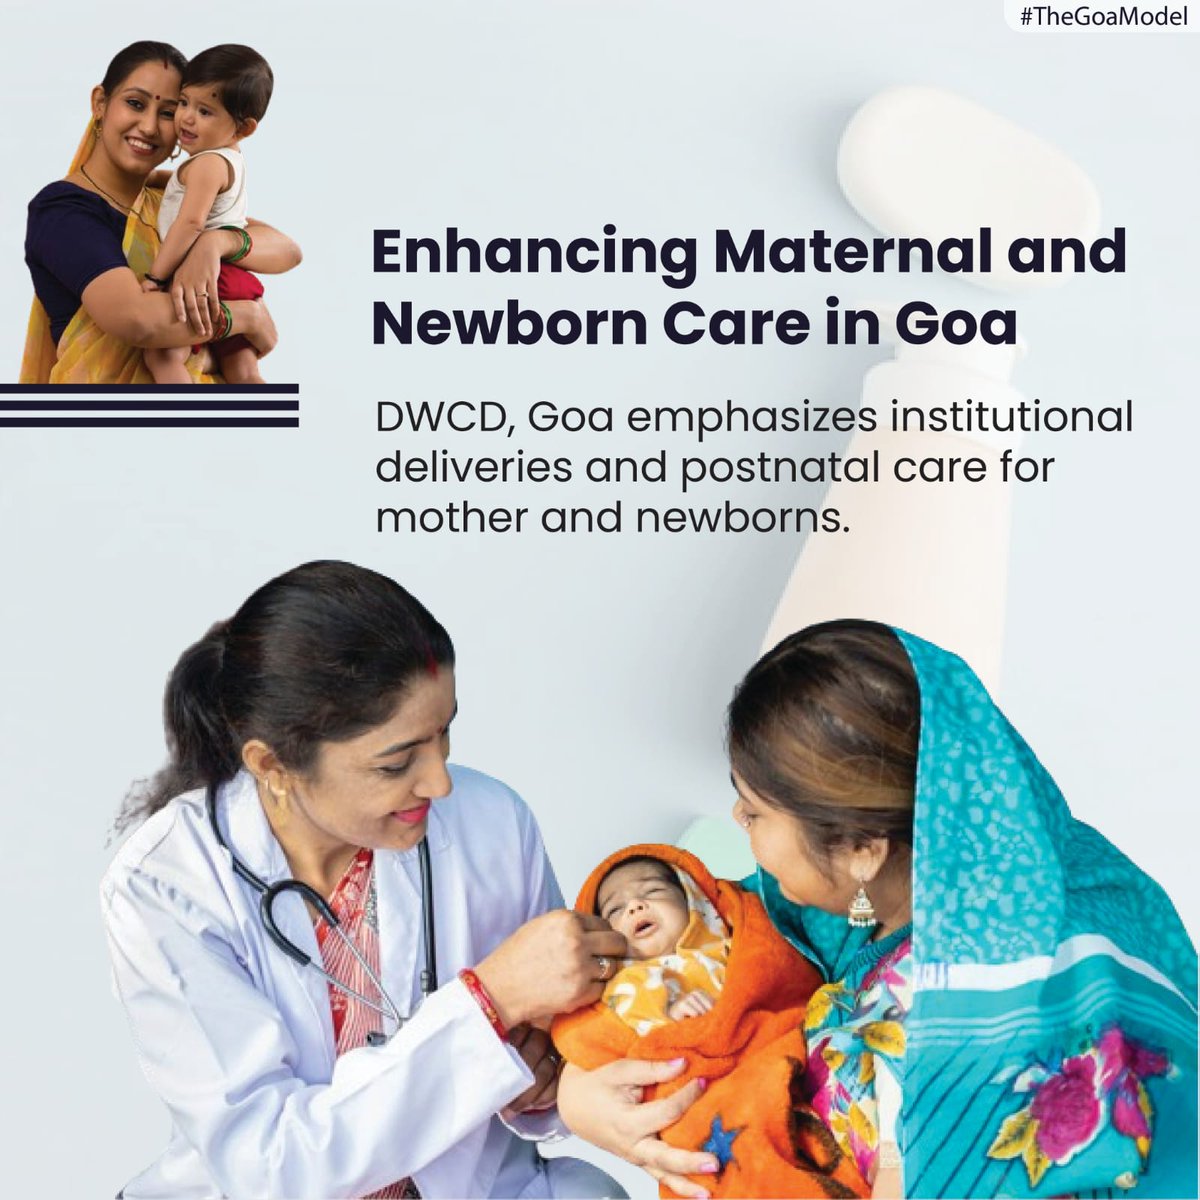 Goa's focus on institutional deliveries and postnatal care reflects Health Department’s commitment to maternal and newborn health. Kudos to the DWCD, Goa for prioritizing comprehensive care! #MaternalHealth #NewbornCare #GoaHealthcare
#TheGoaModel
#HealthDepartment #DWCDGoa